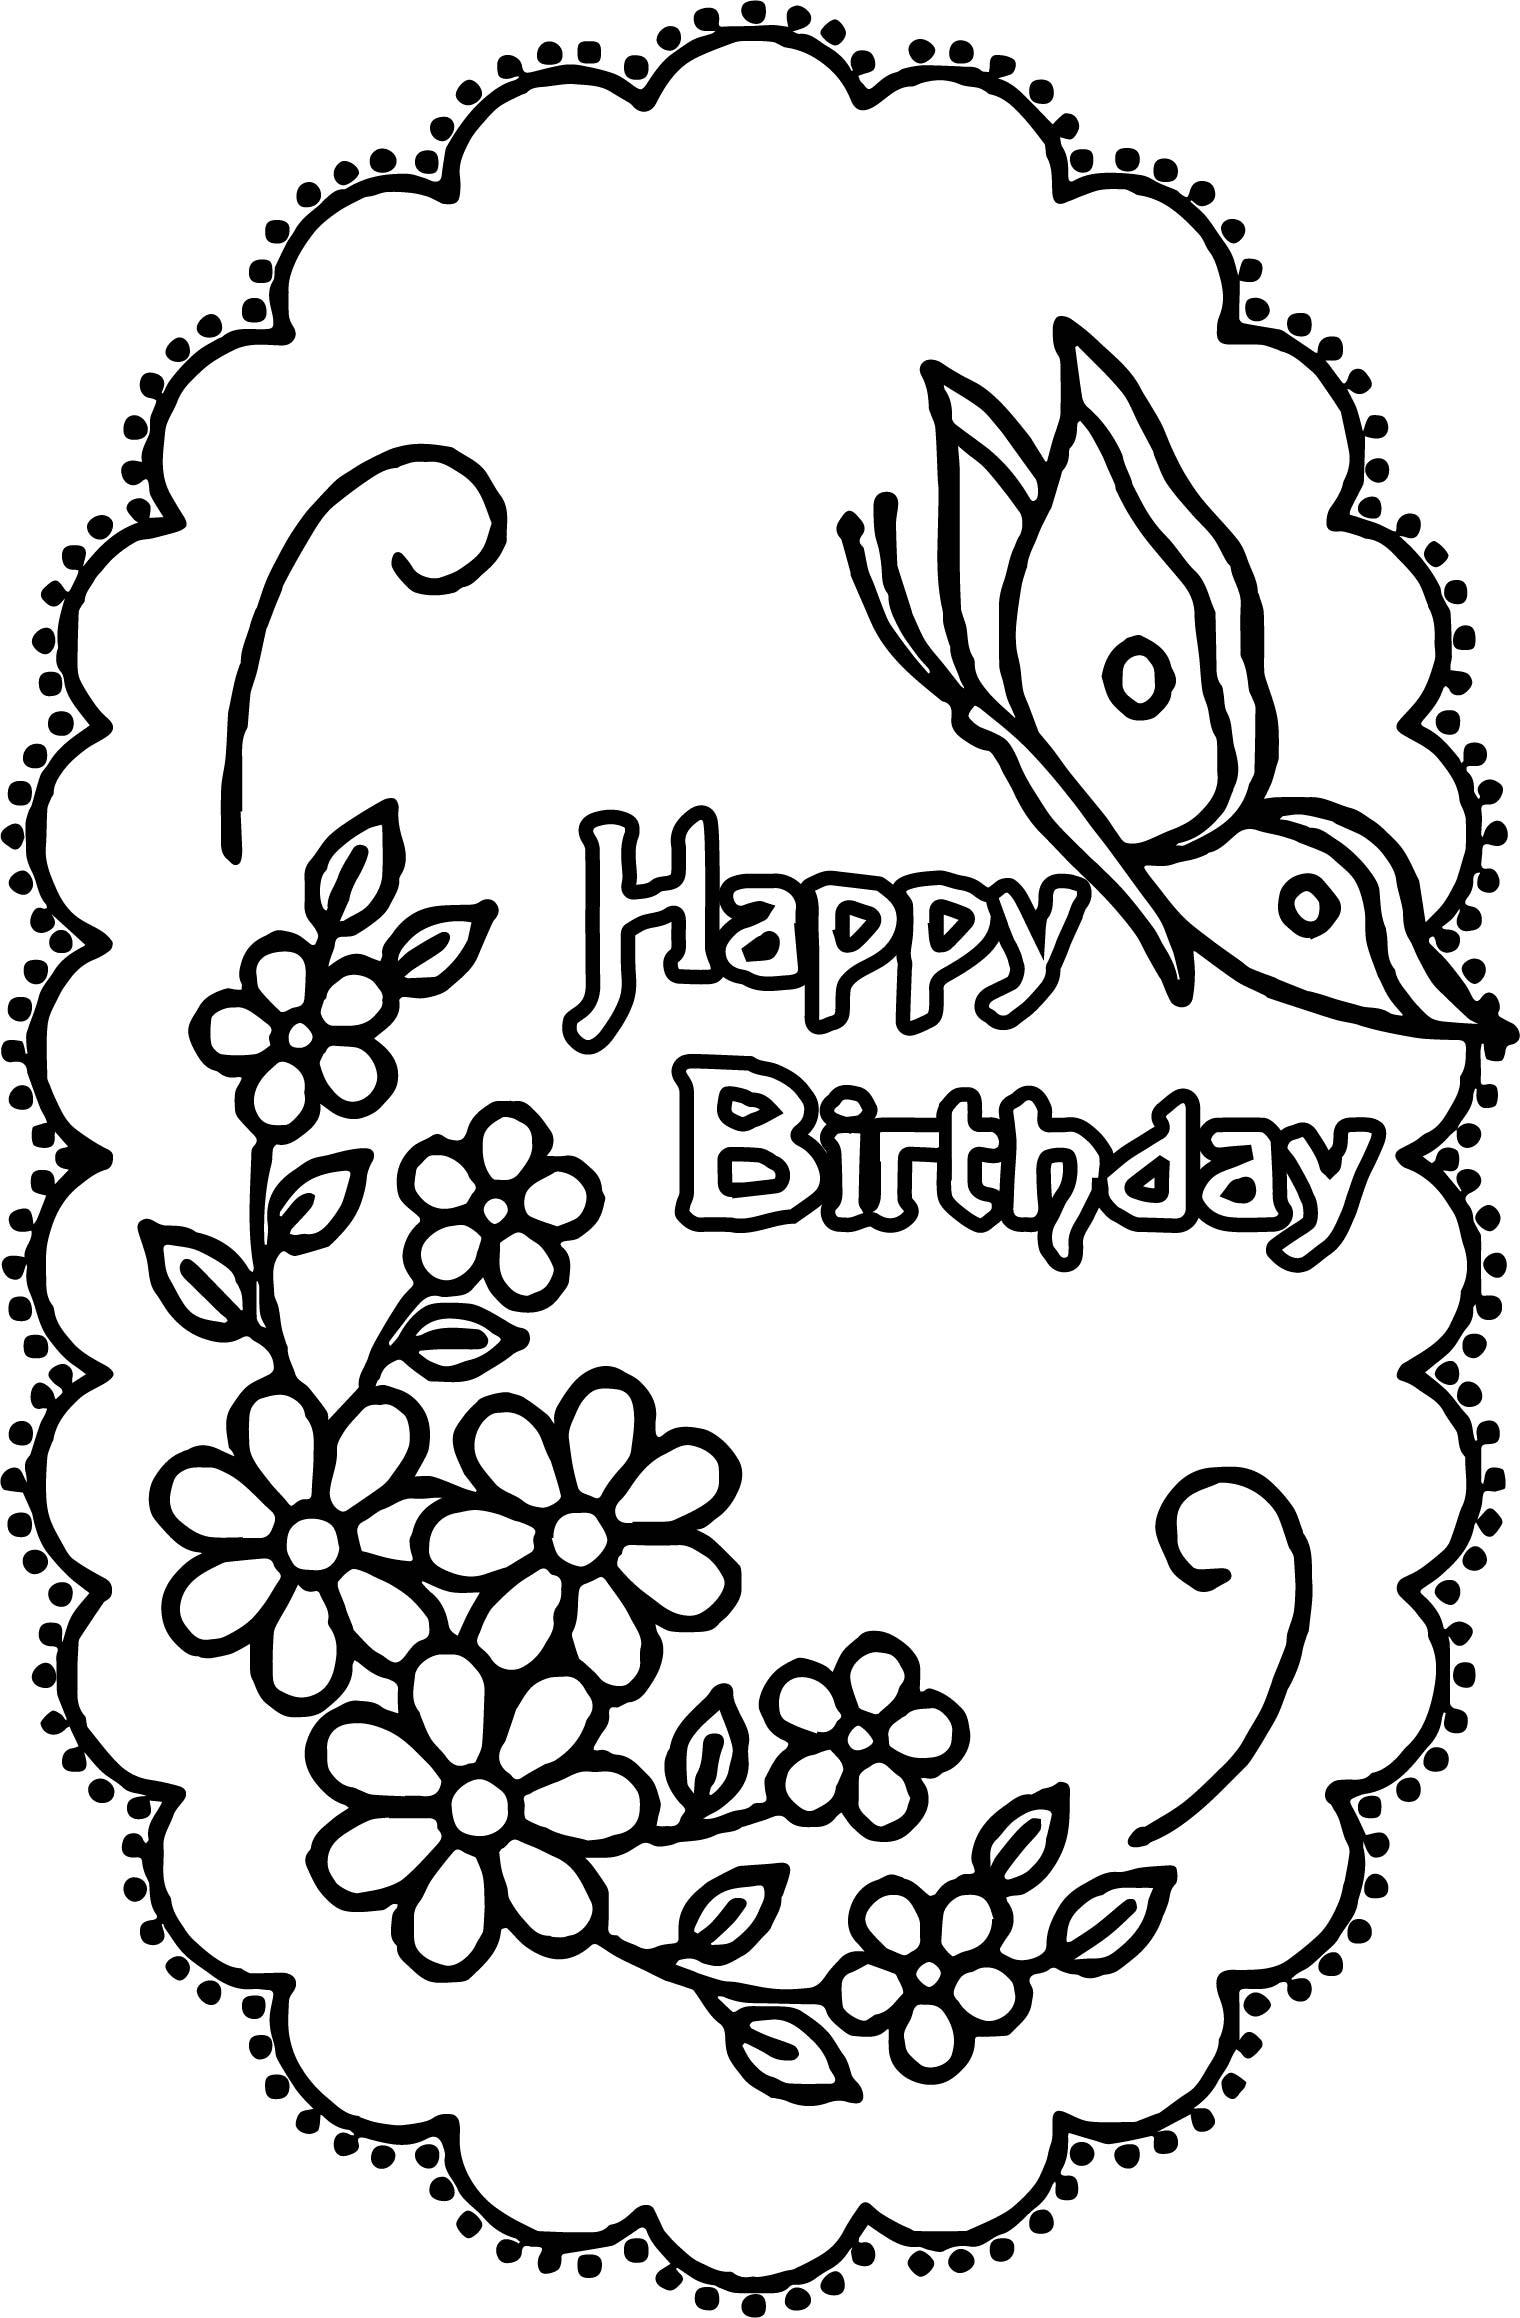 Happy Birthday Adult Coloring Pages at GetColorings.com | Free ...